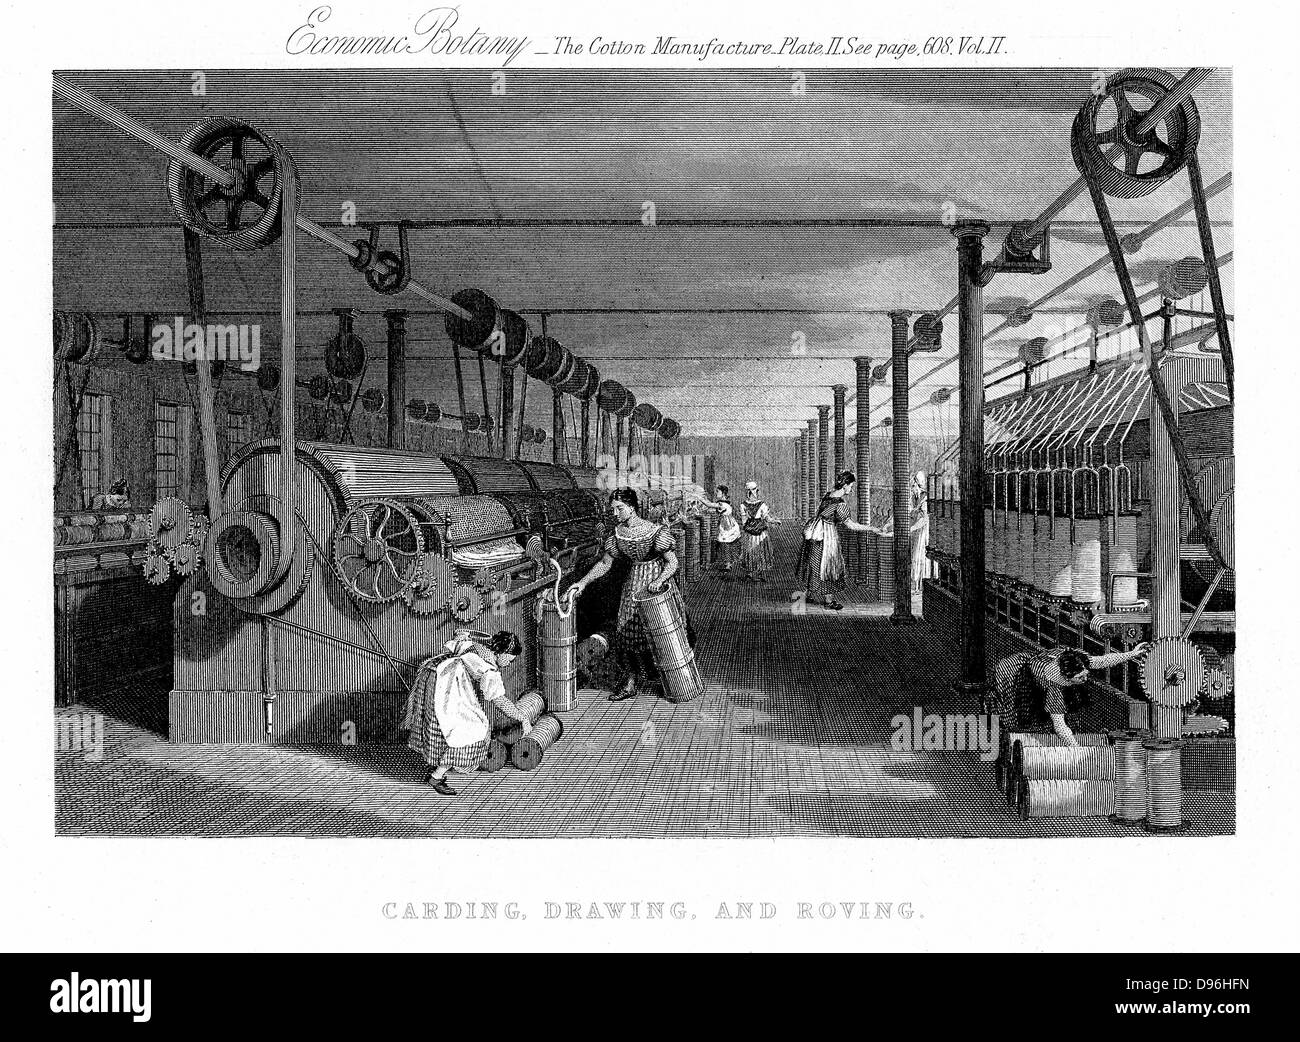 Carding, drawing and roving cotton. Carding engine (left) delivers cotton in a single sliver. Factory operated by shafts & belting. Could be powered by water or steam. Engraving c1830. Stock Photo